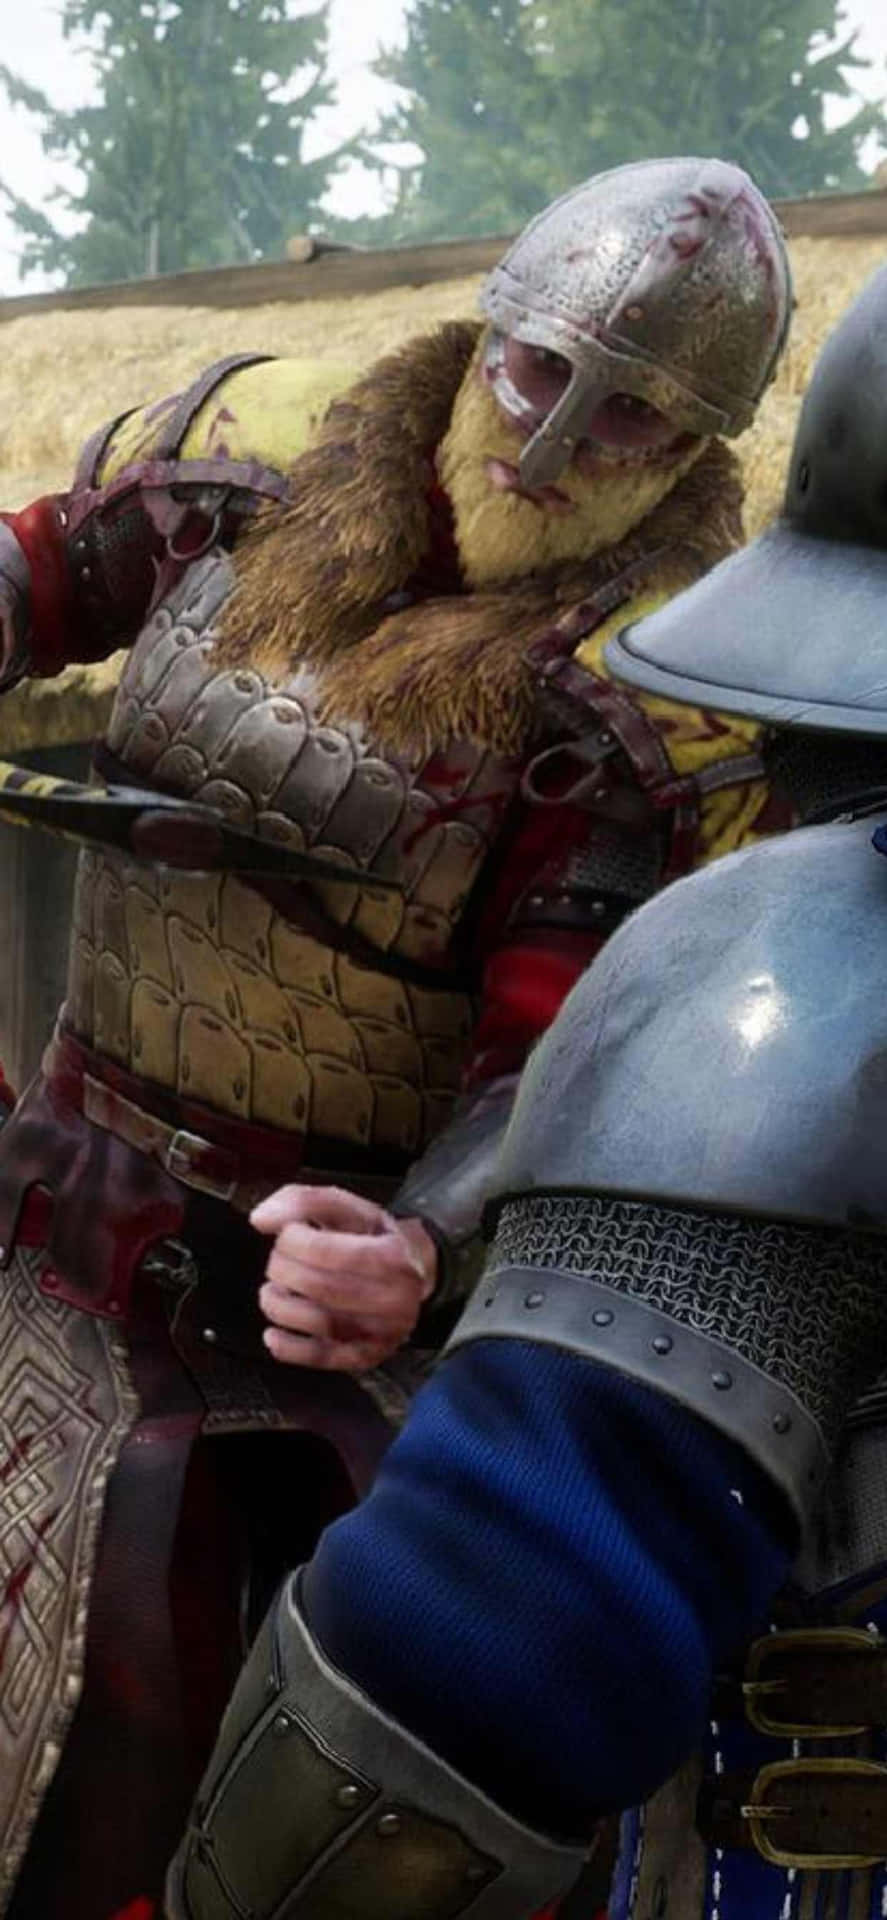 A Man In Armor Is Fighting Another Man